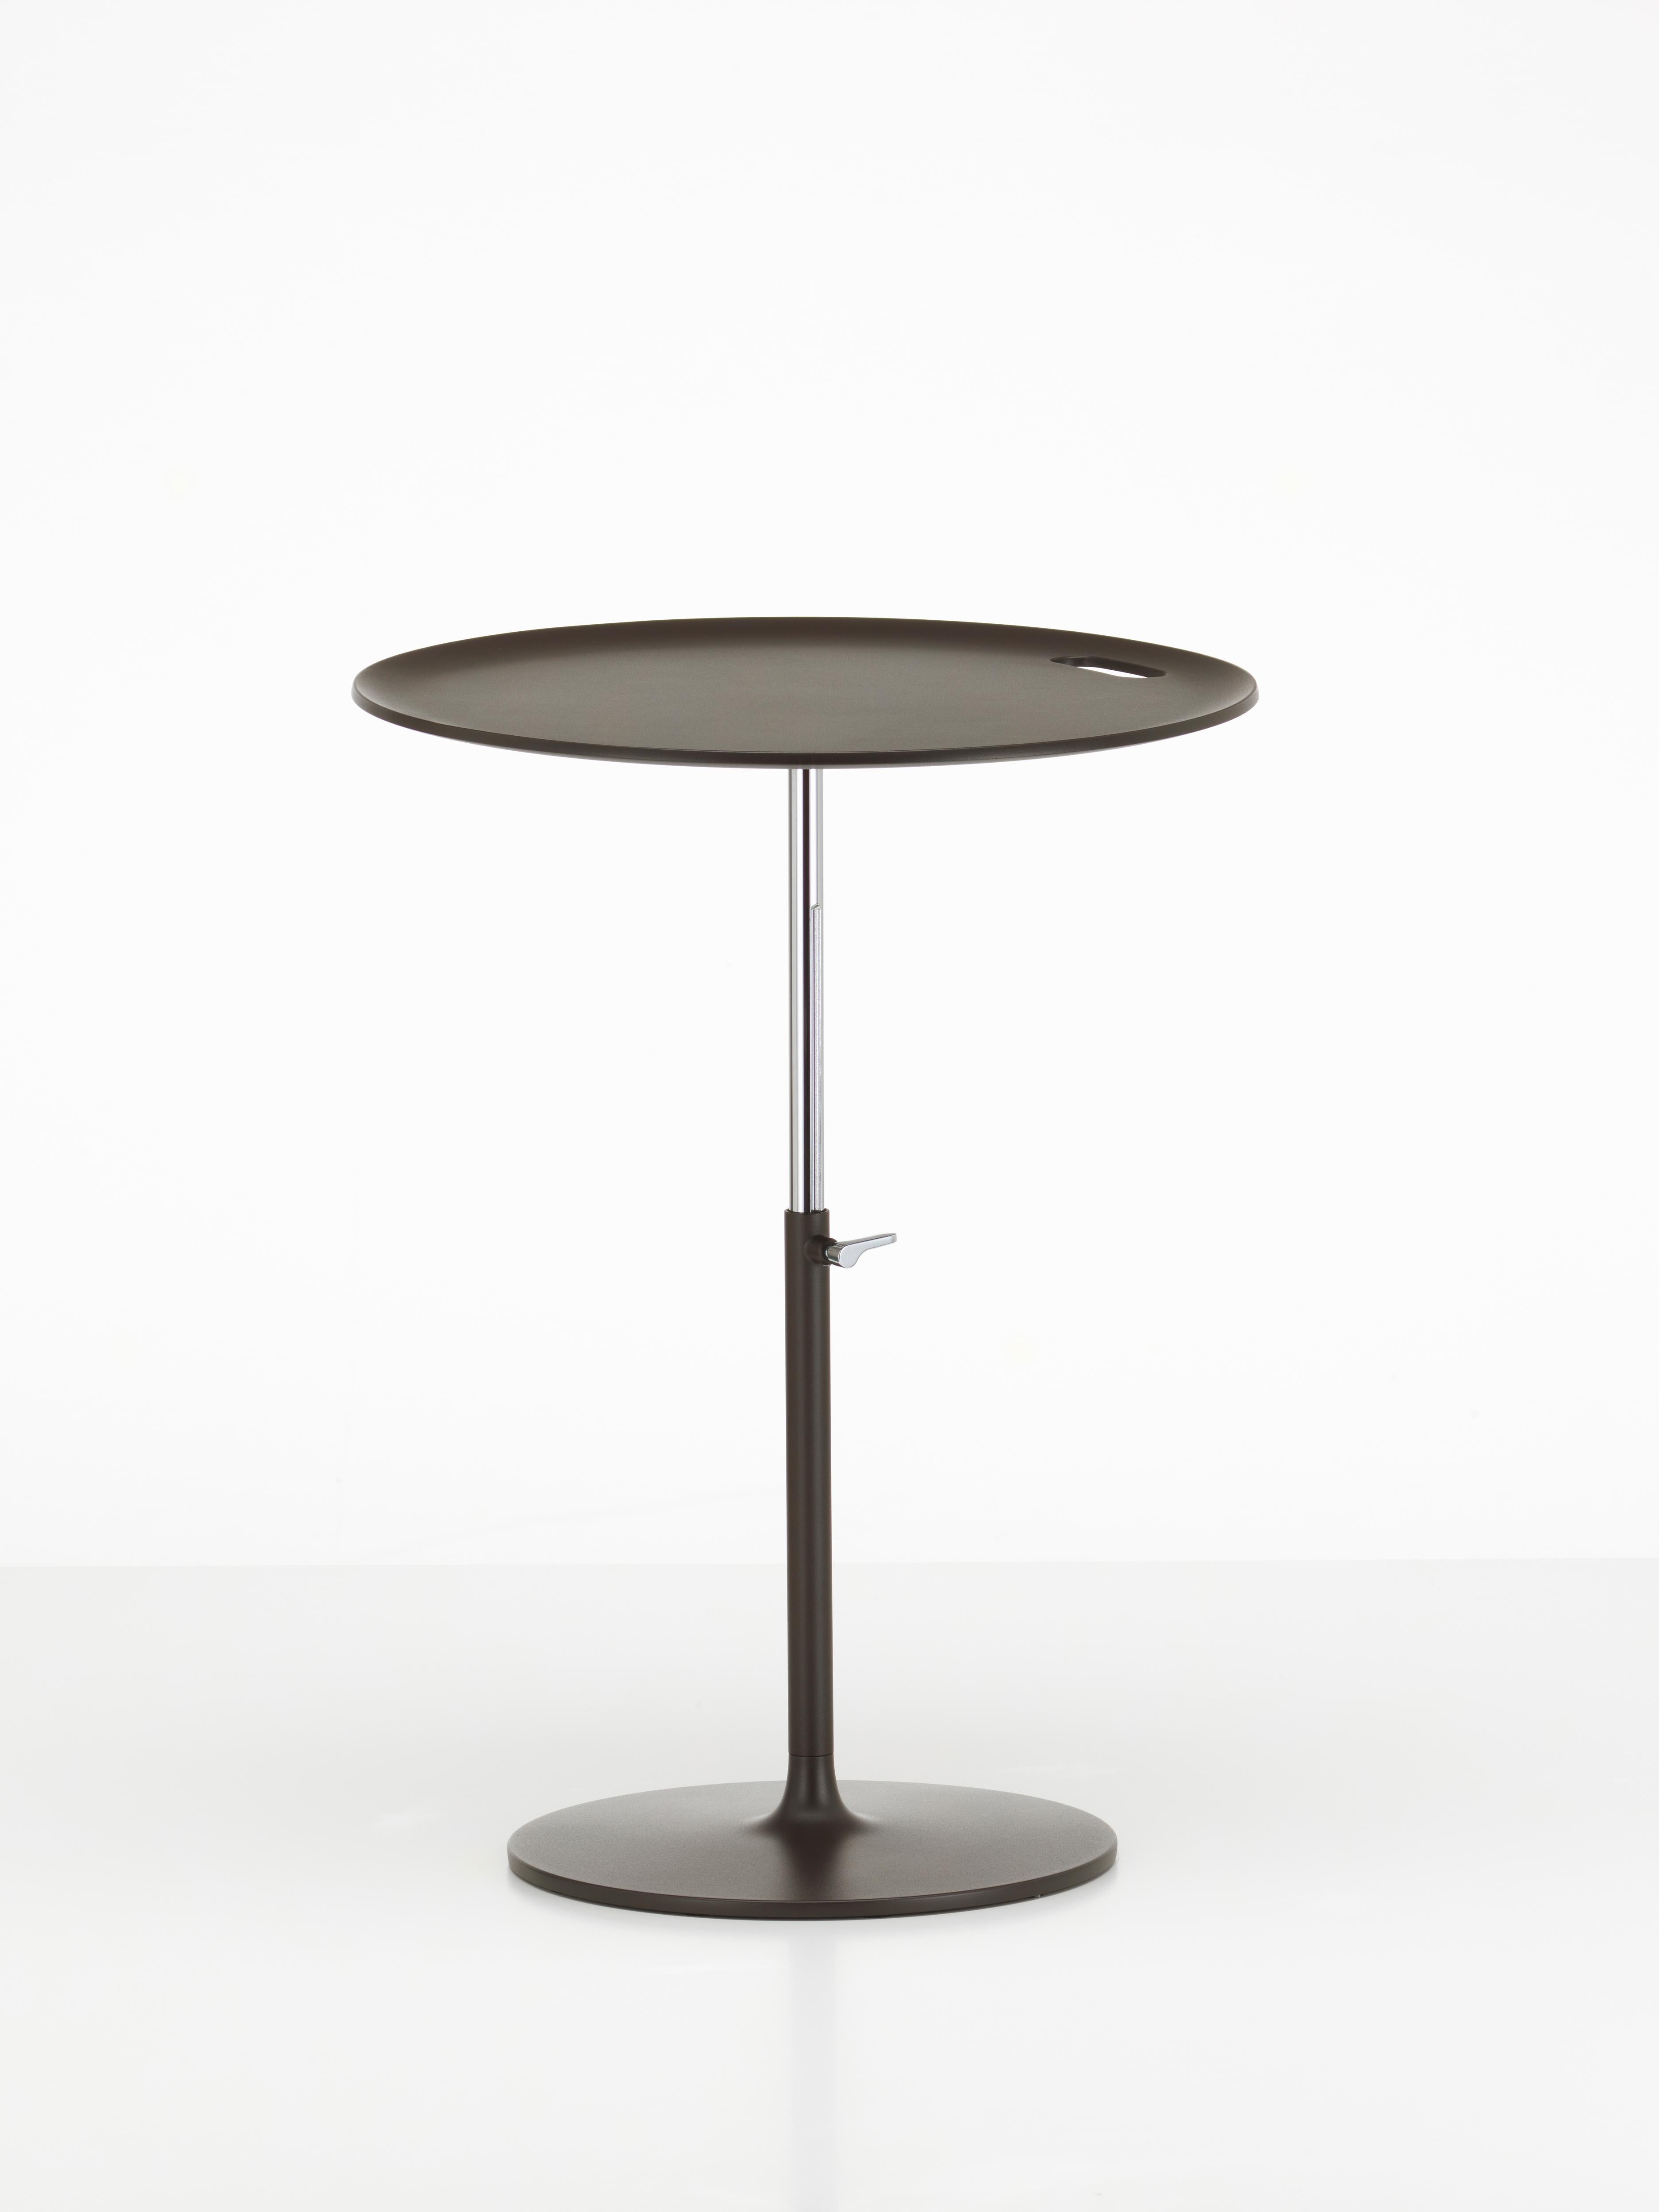 These products are only available in the United States.

The Rise Table was designed by Jasper Morrison as a practical companion for the home. The circular form of the occasional table‘s top and base make it an appealing decorative accent in any